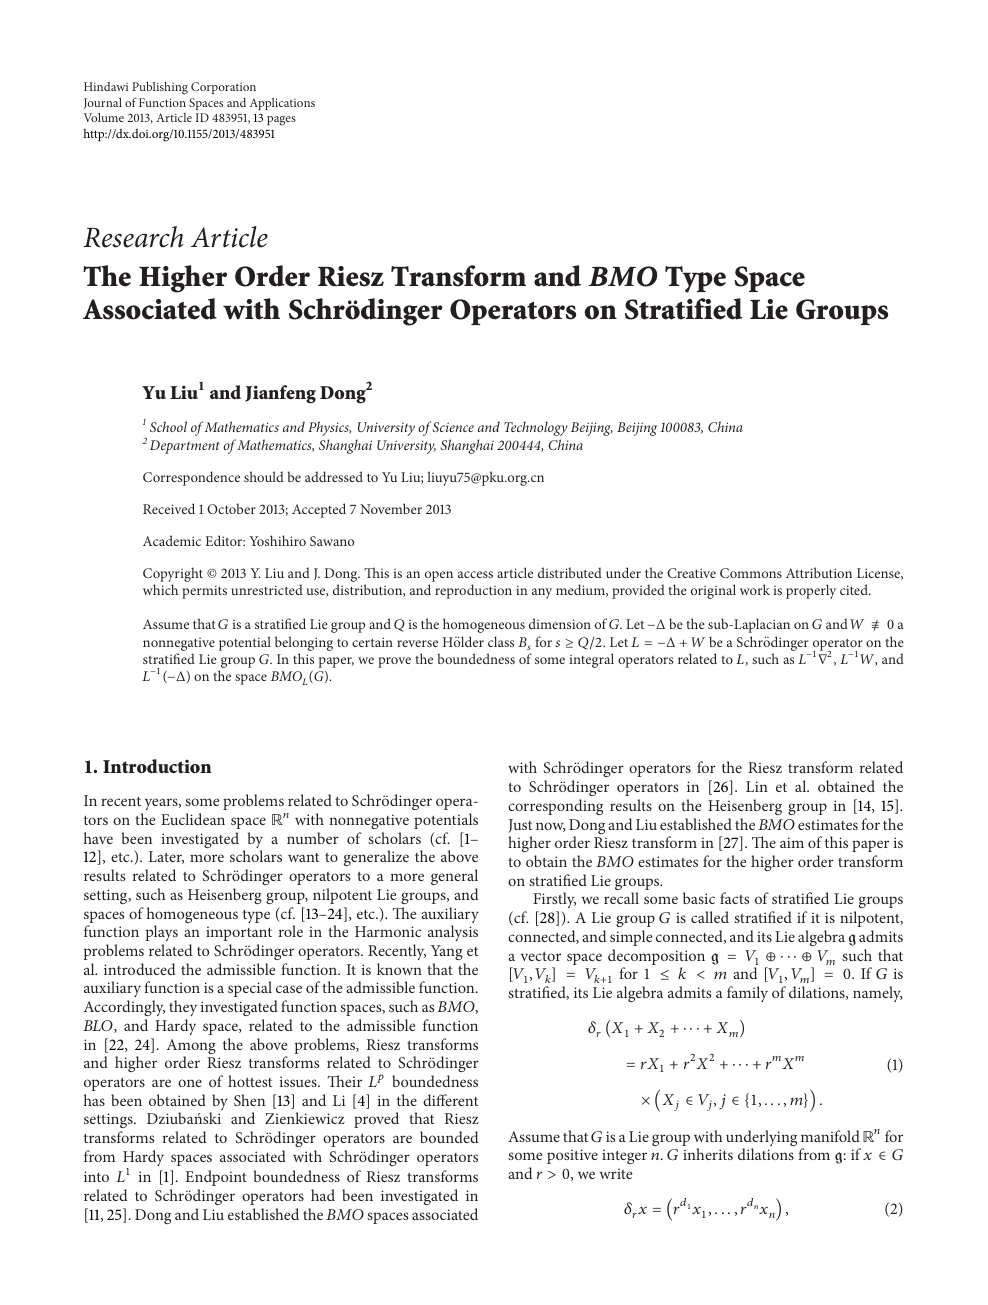 The Higher Order Riesz Transform And Bmo Type Space Associated With Schrodinger Operators On Stratified Lie Groups Topic Of Research Paper In Mathematics Download Scholarly Article Pdf And Read For Free